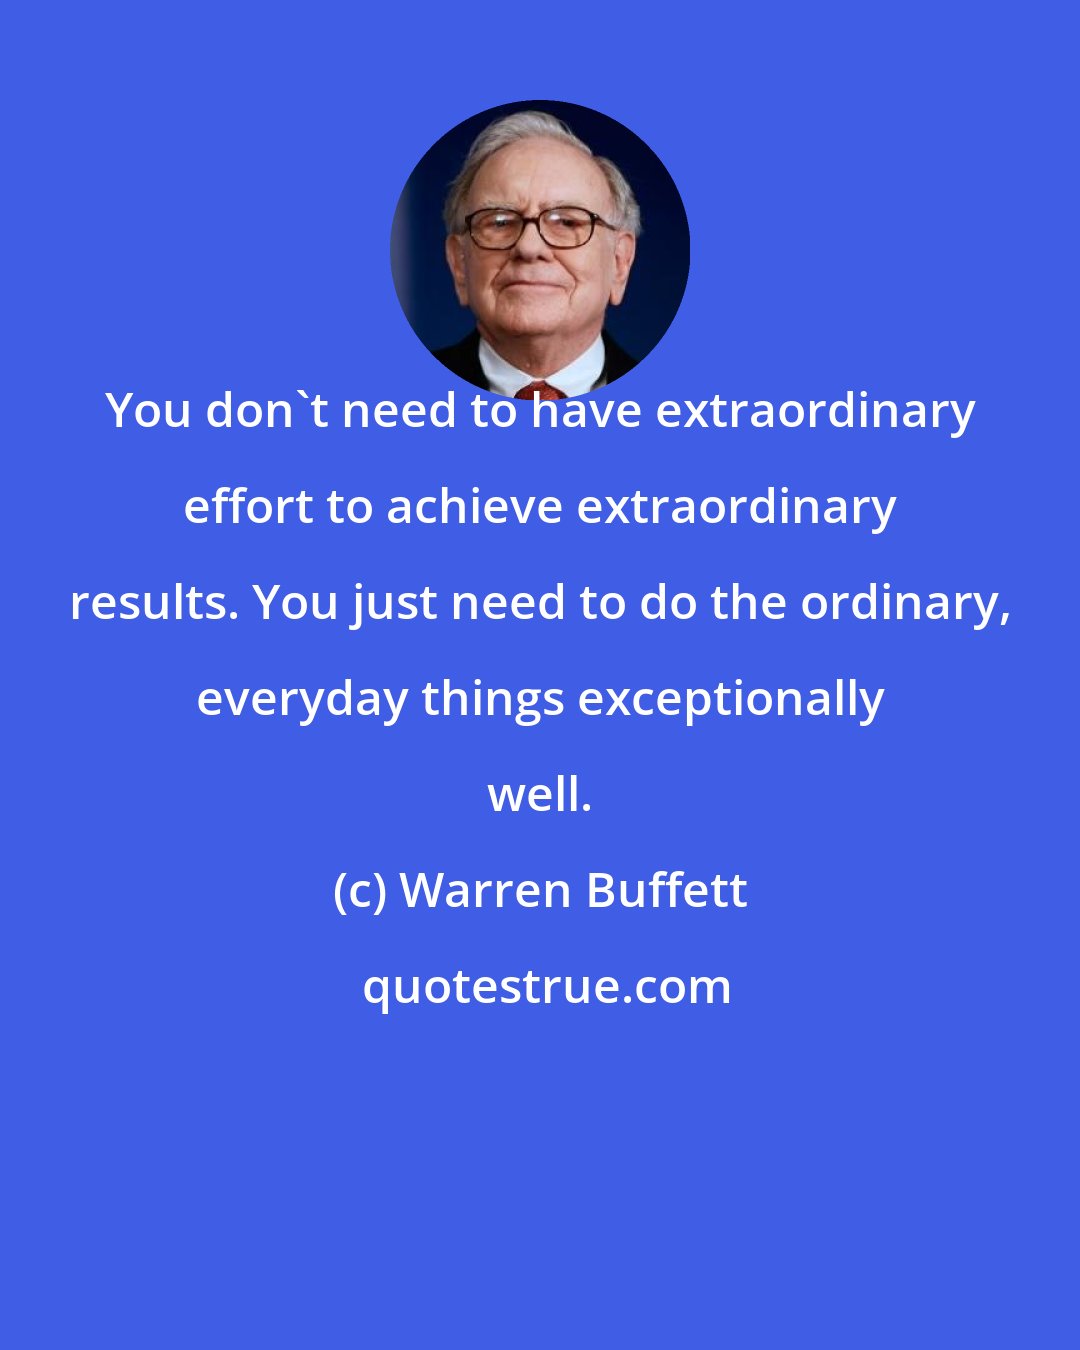 Warren Buffett: You don't need to have extraordinary effort to achieve extraordinary results. You just need to do the ordinary, everyday things exceptionally well.